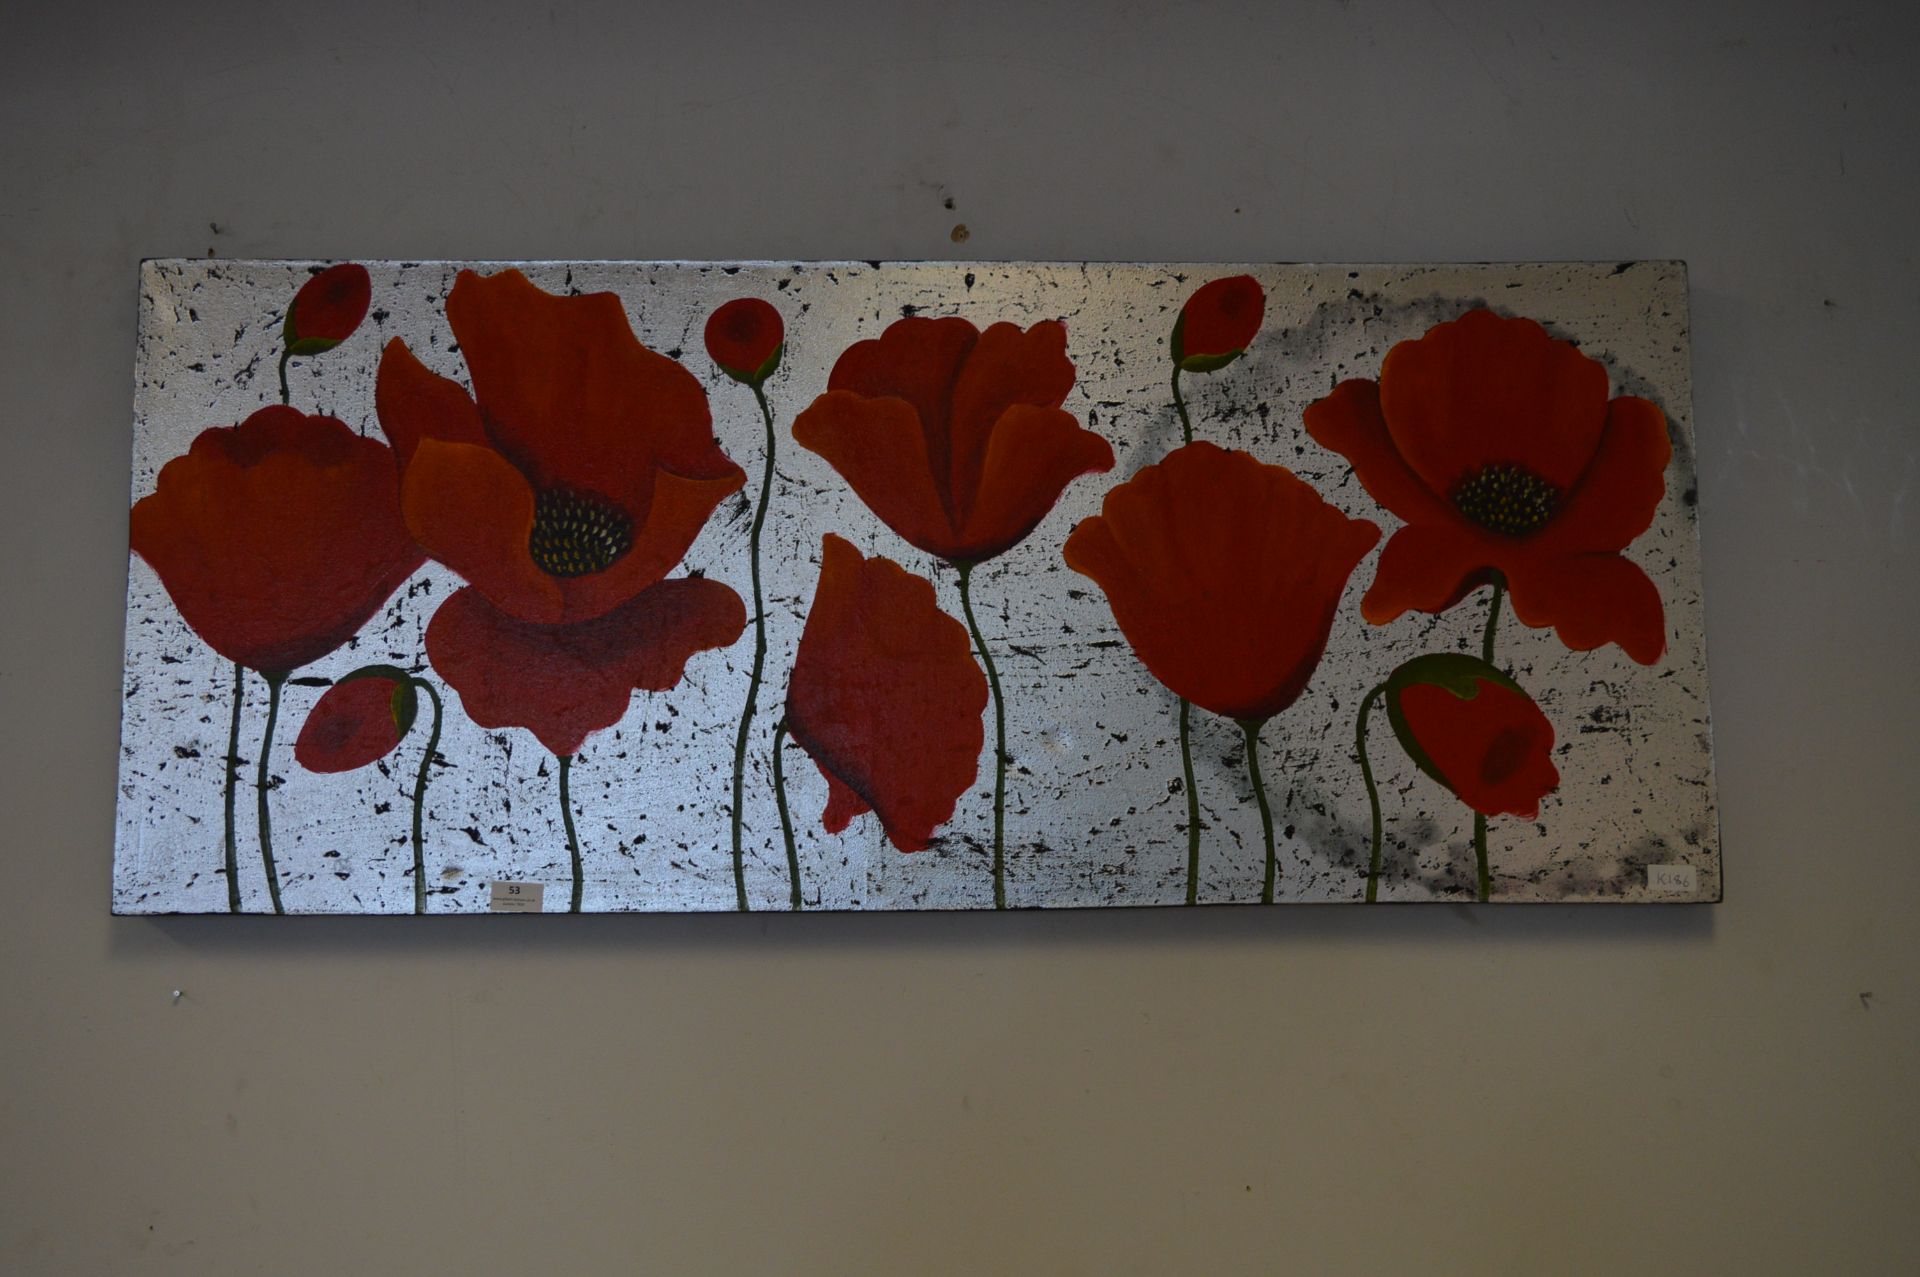 Unframed Printed Canvas "Poppies"